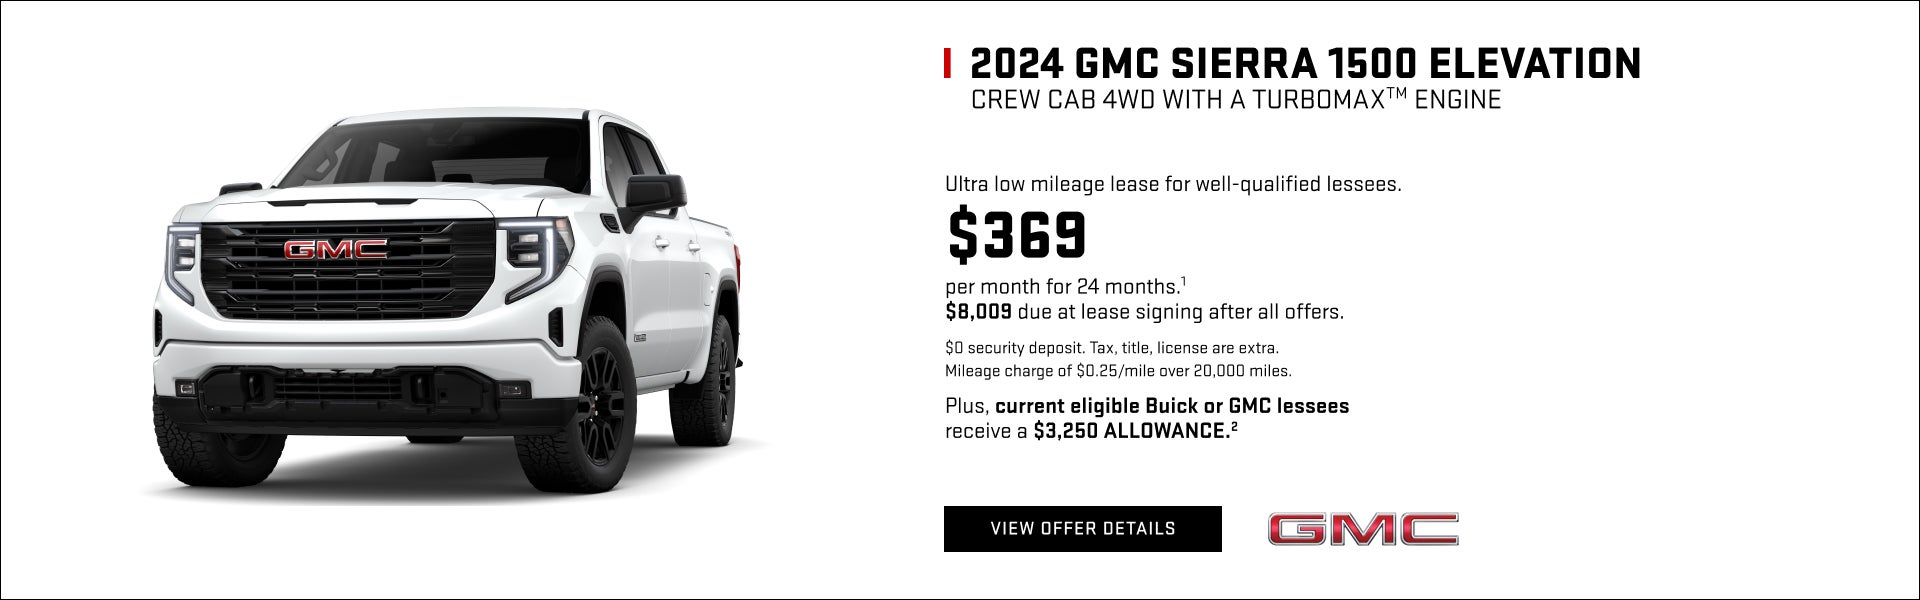 Ultra low mileage lease for well-qualified lessees.

$369 per month for 24 months.1 

$8,009 due ...